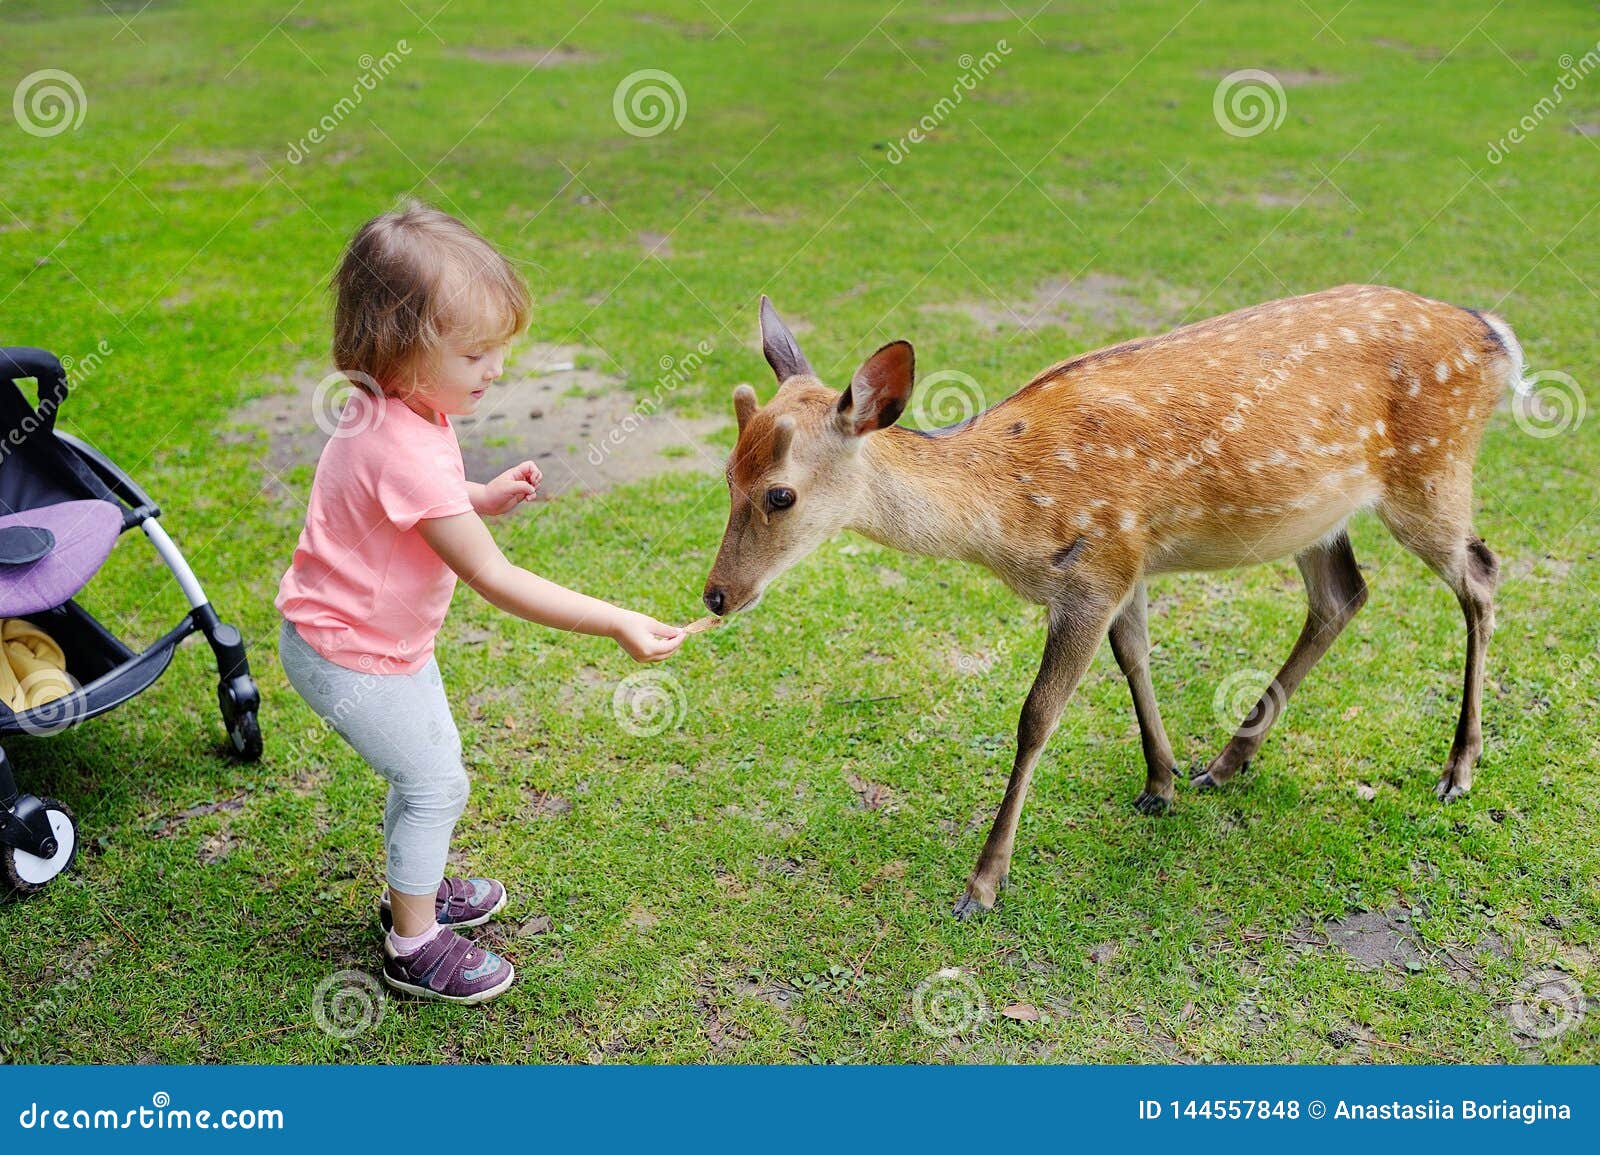 Child Feeding Wild Deer at Petting Zoo. Kids Feed Animals at Outdoor Safari  Park. Kid and Pet Animal. Stock Photo - Image of lifestyle, herd: 144557848